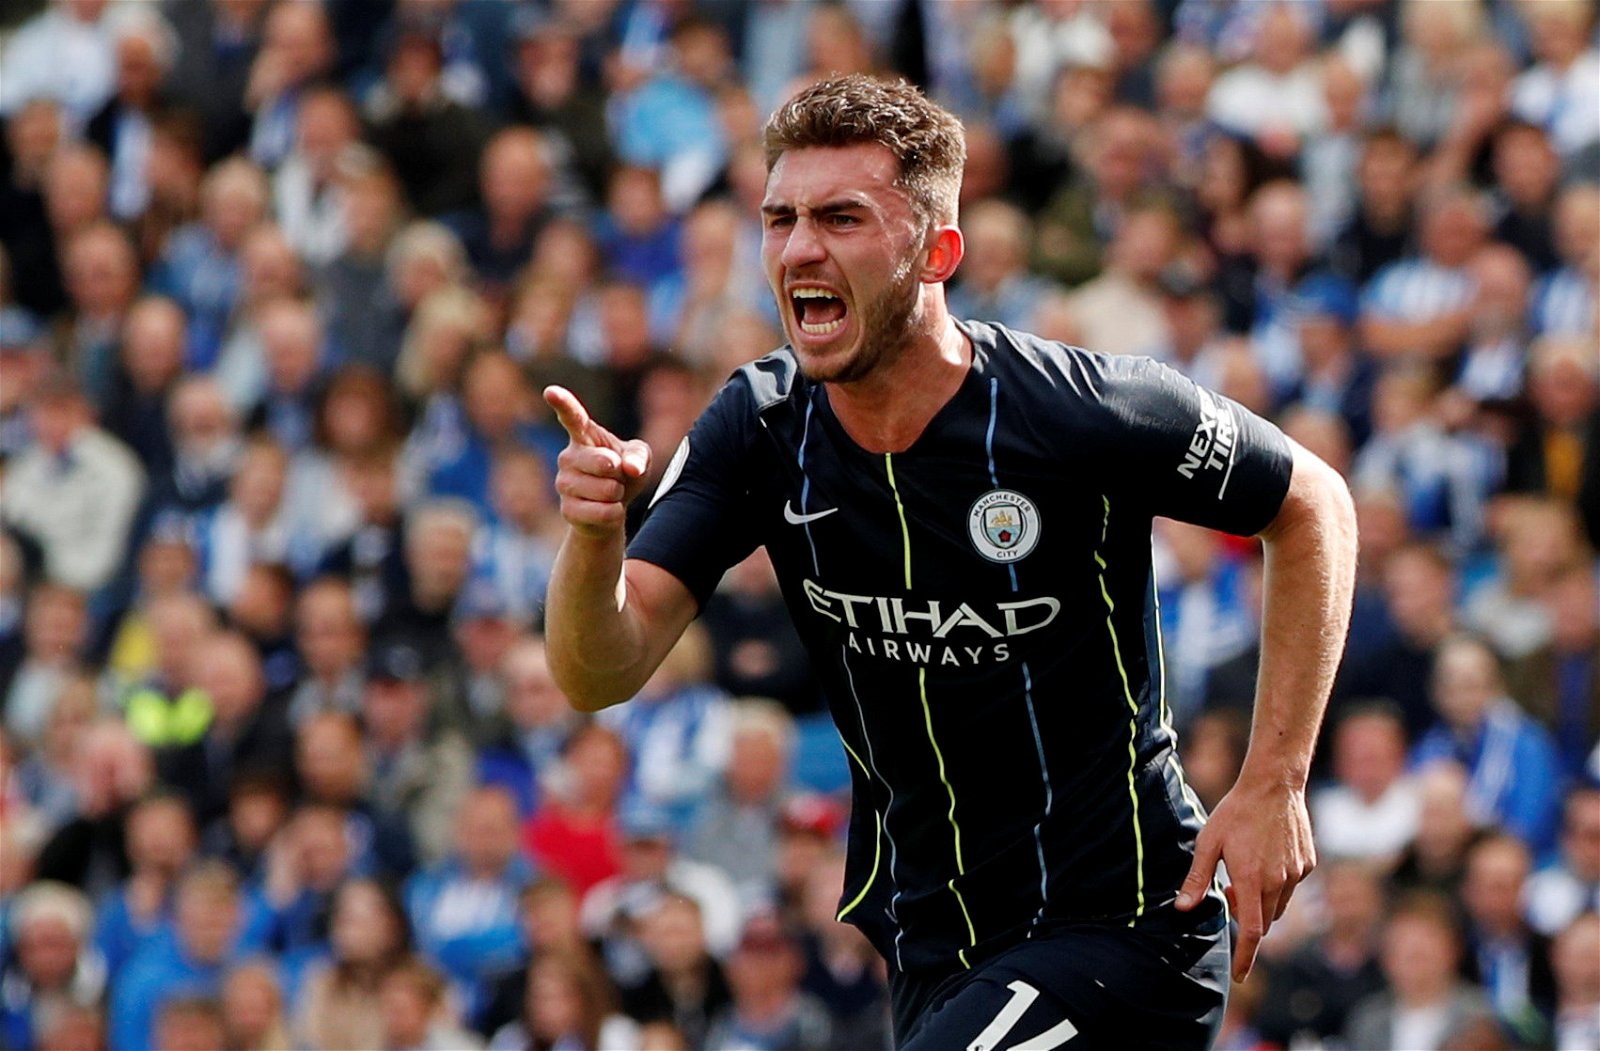 Top Five tallest Manchester City players - Laporte